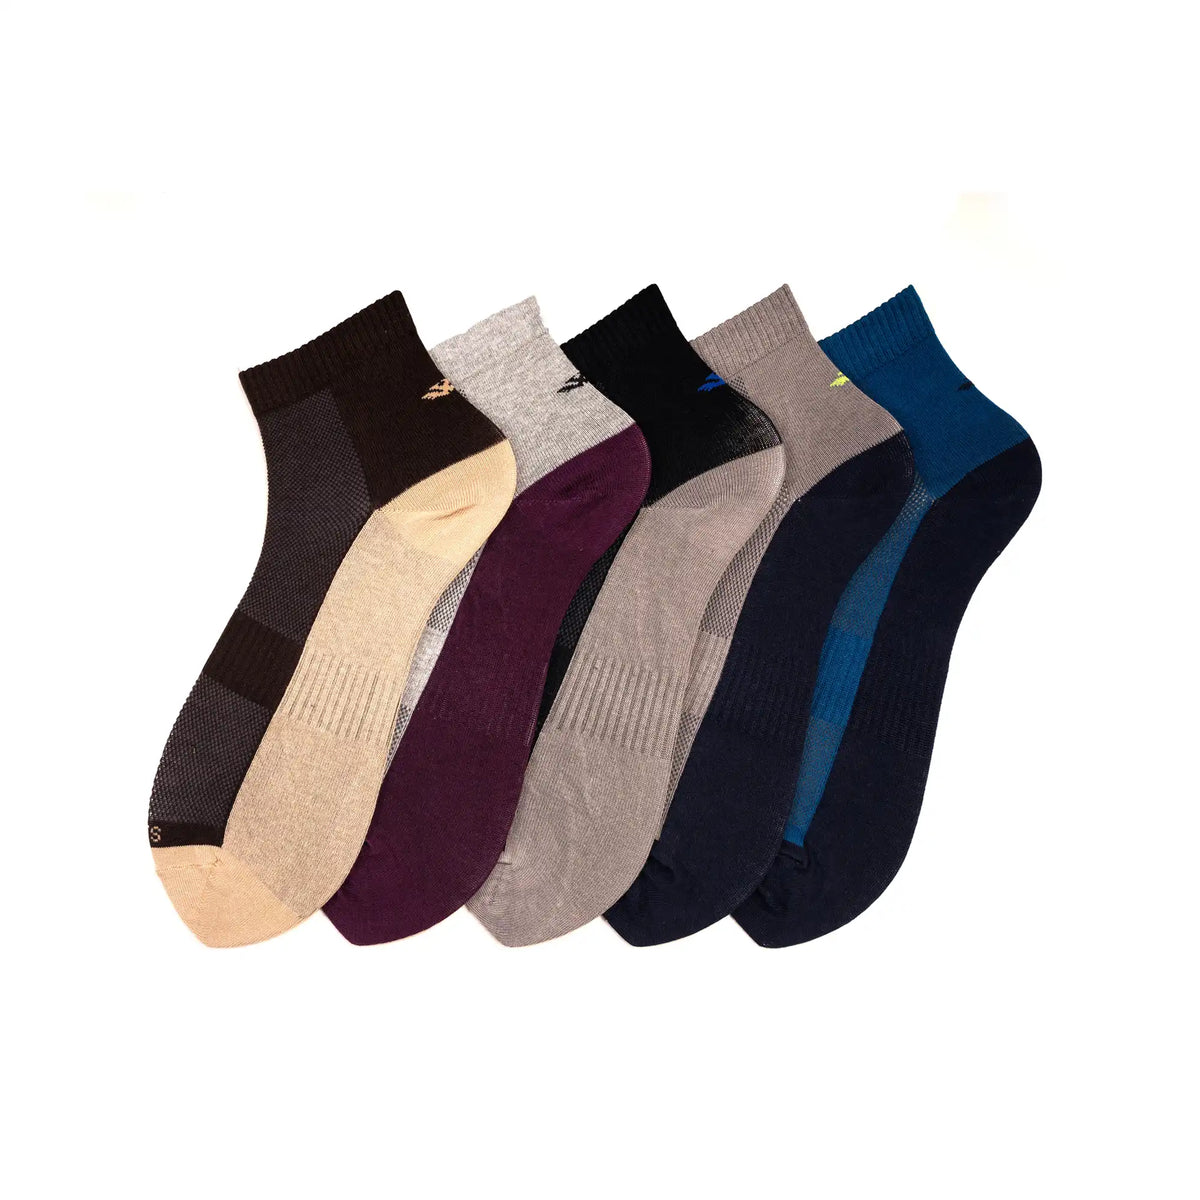 Young Wings Men's Multi Colour Cotton Fabric Design Ankle Length Socks - Pack of 5, Style no. M1-2111